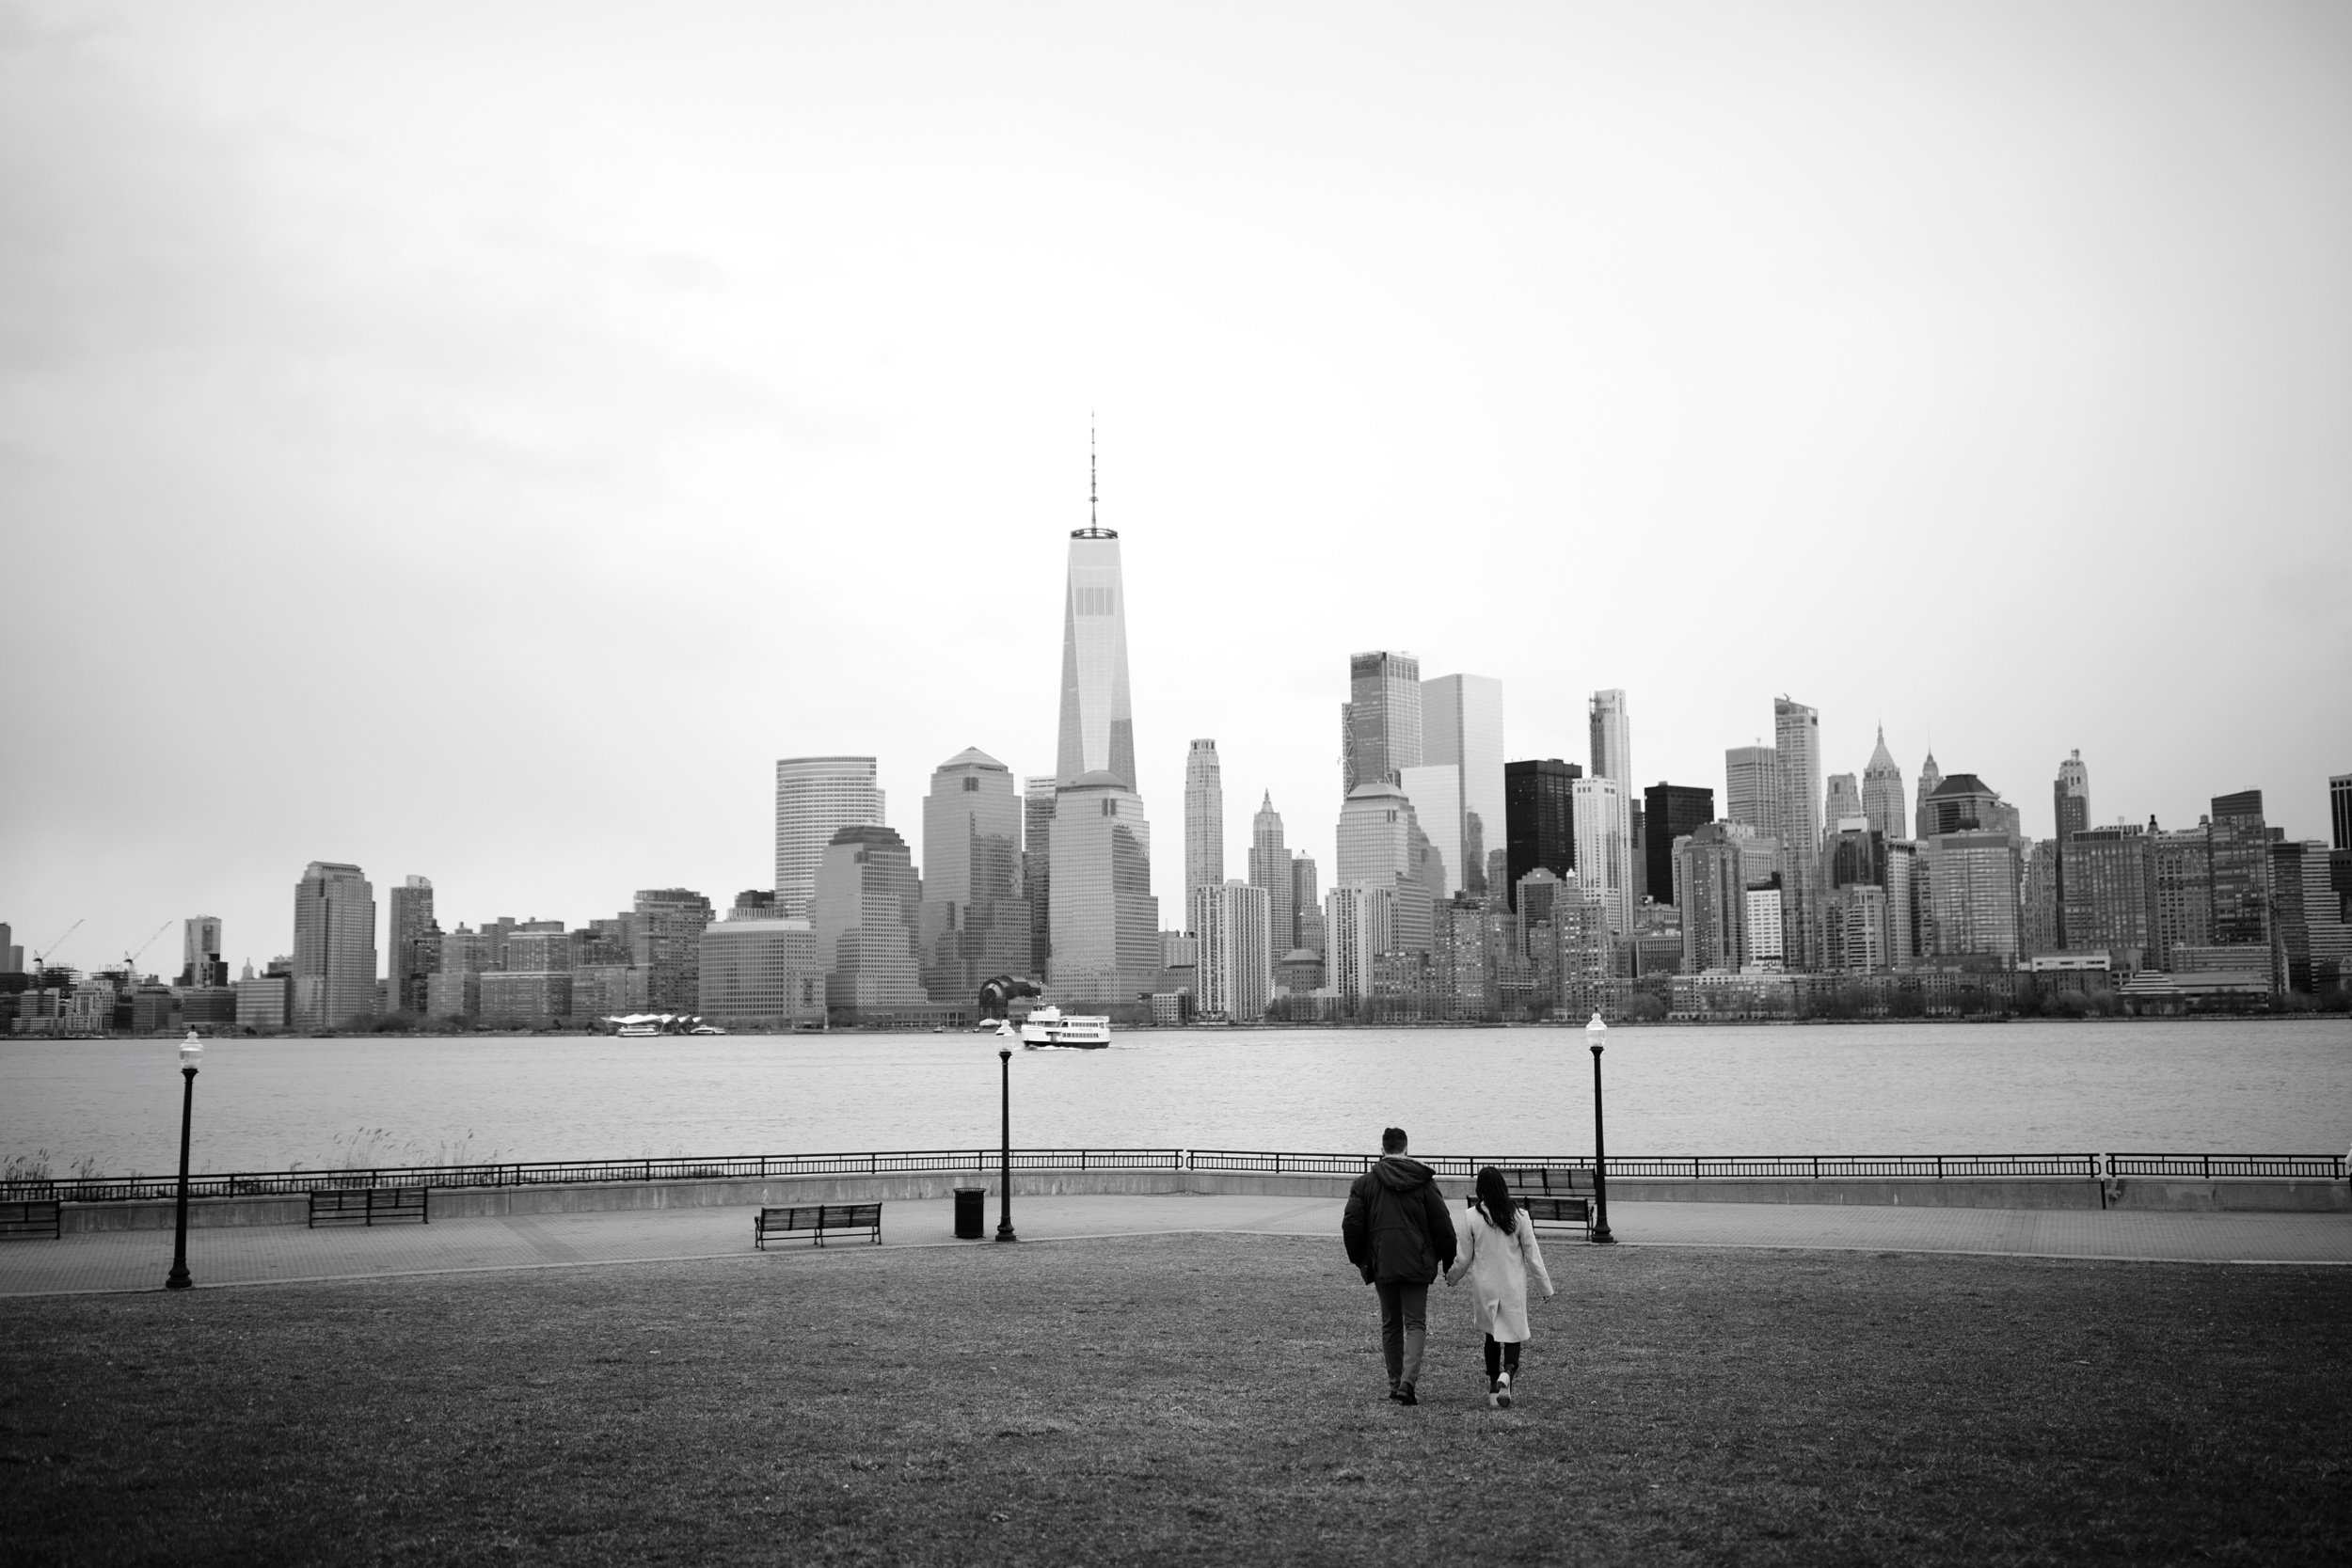 Liberty State Park, New Jersey Engagement Photos-New Jersey Wedding and Engagement Photographer